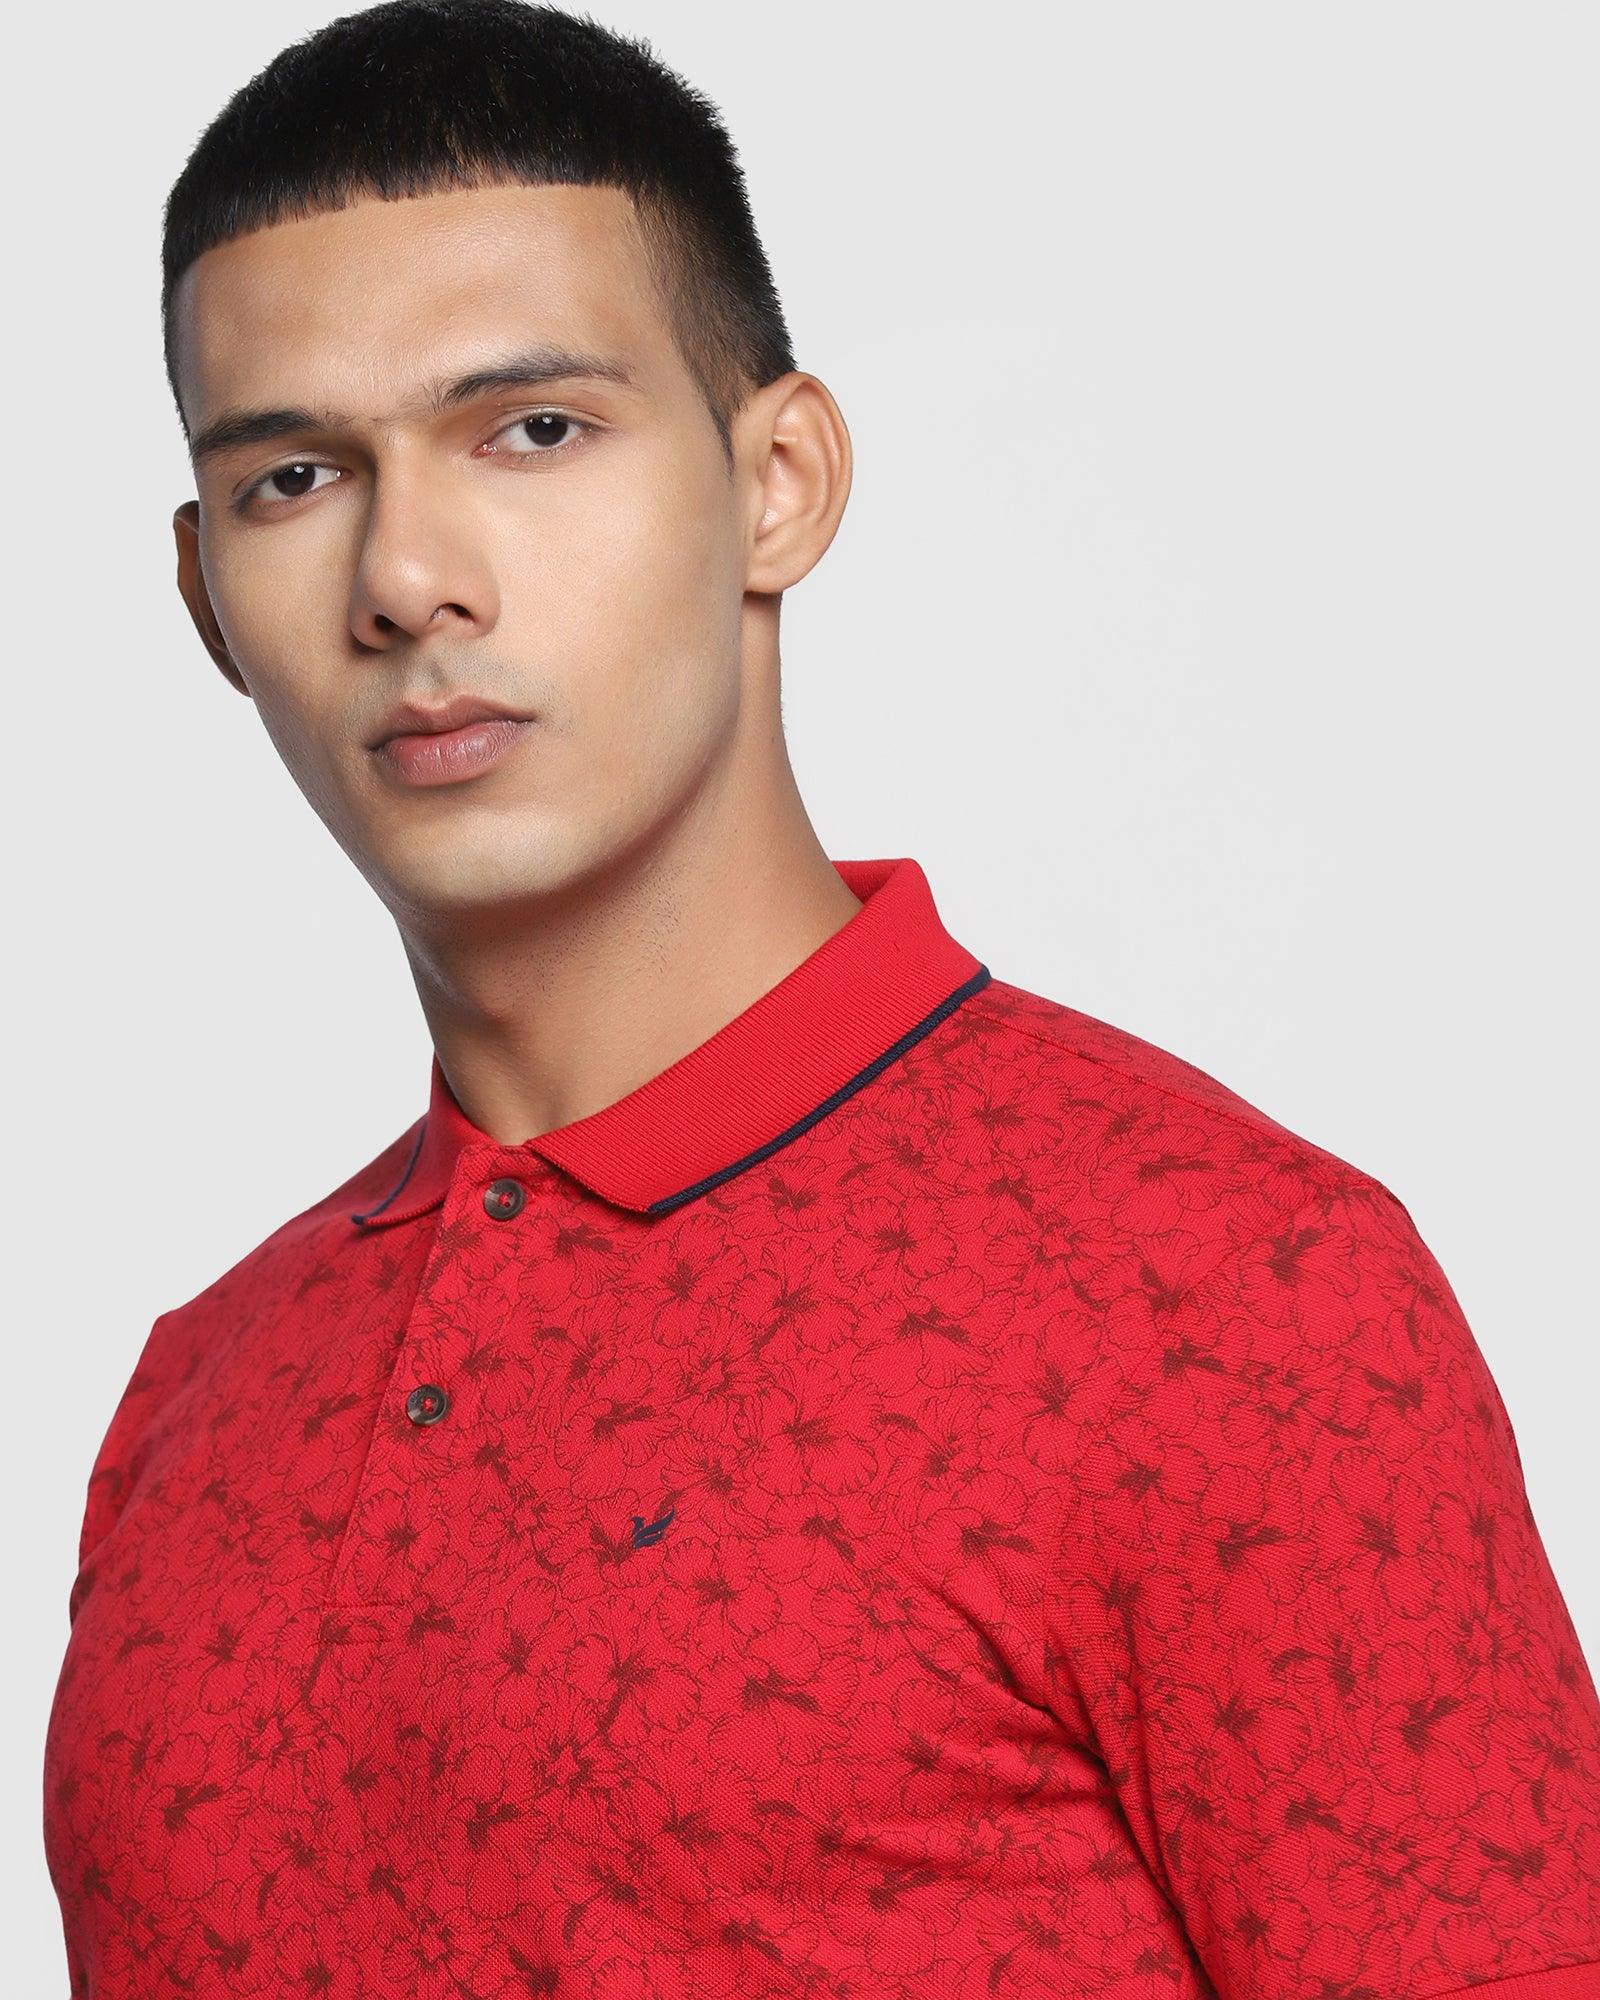 Polo Red Printed T Shirt - Hibiscus